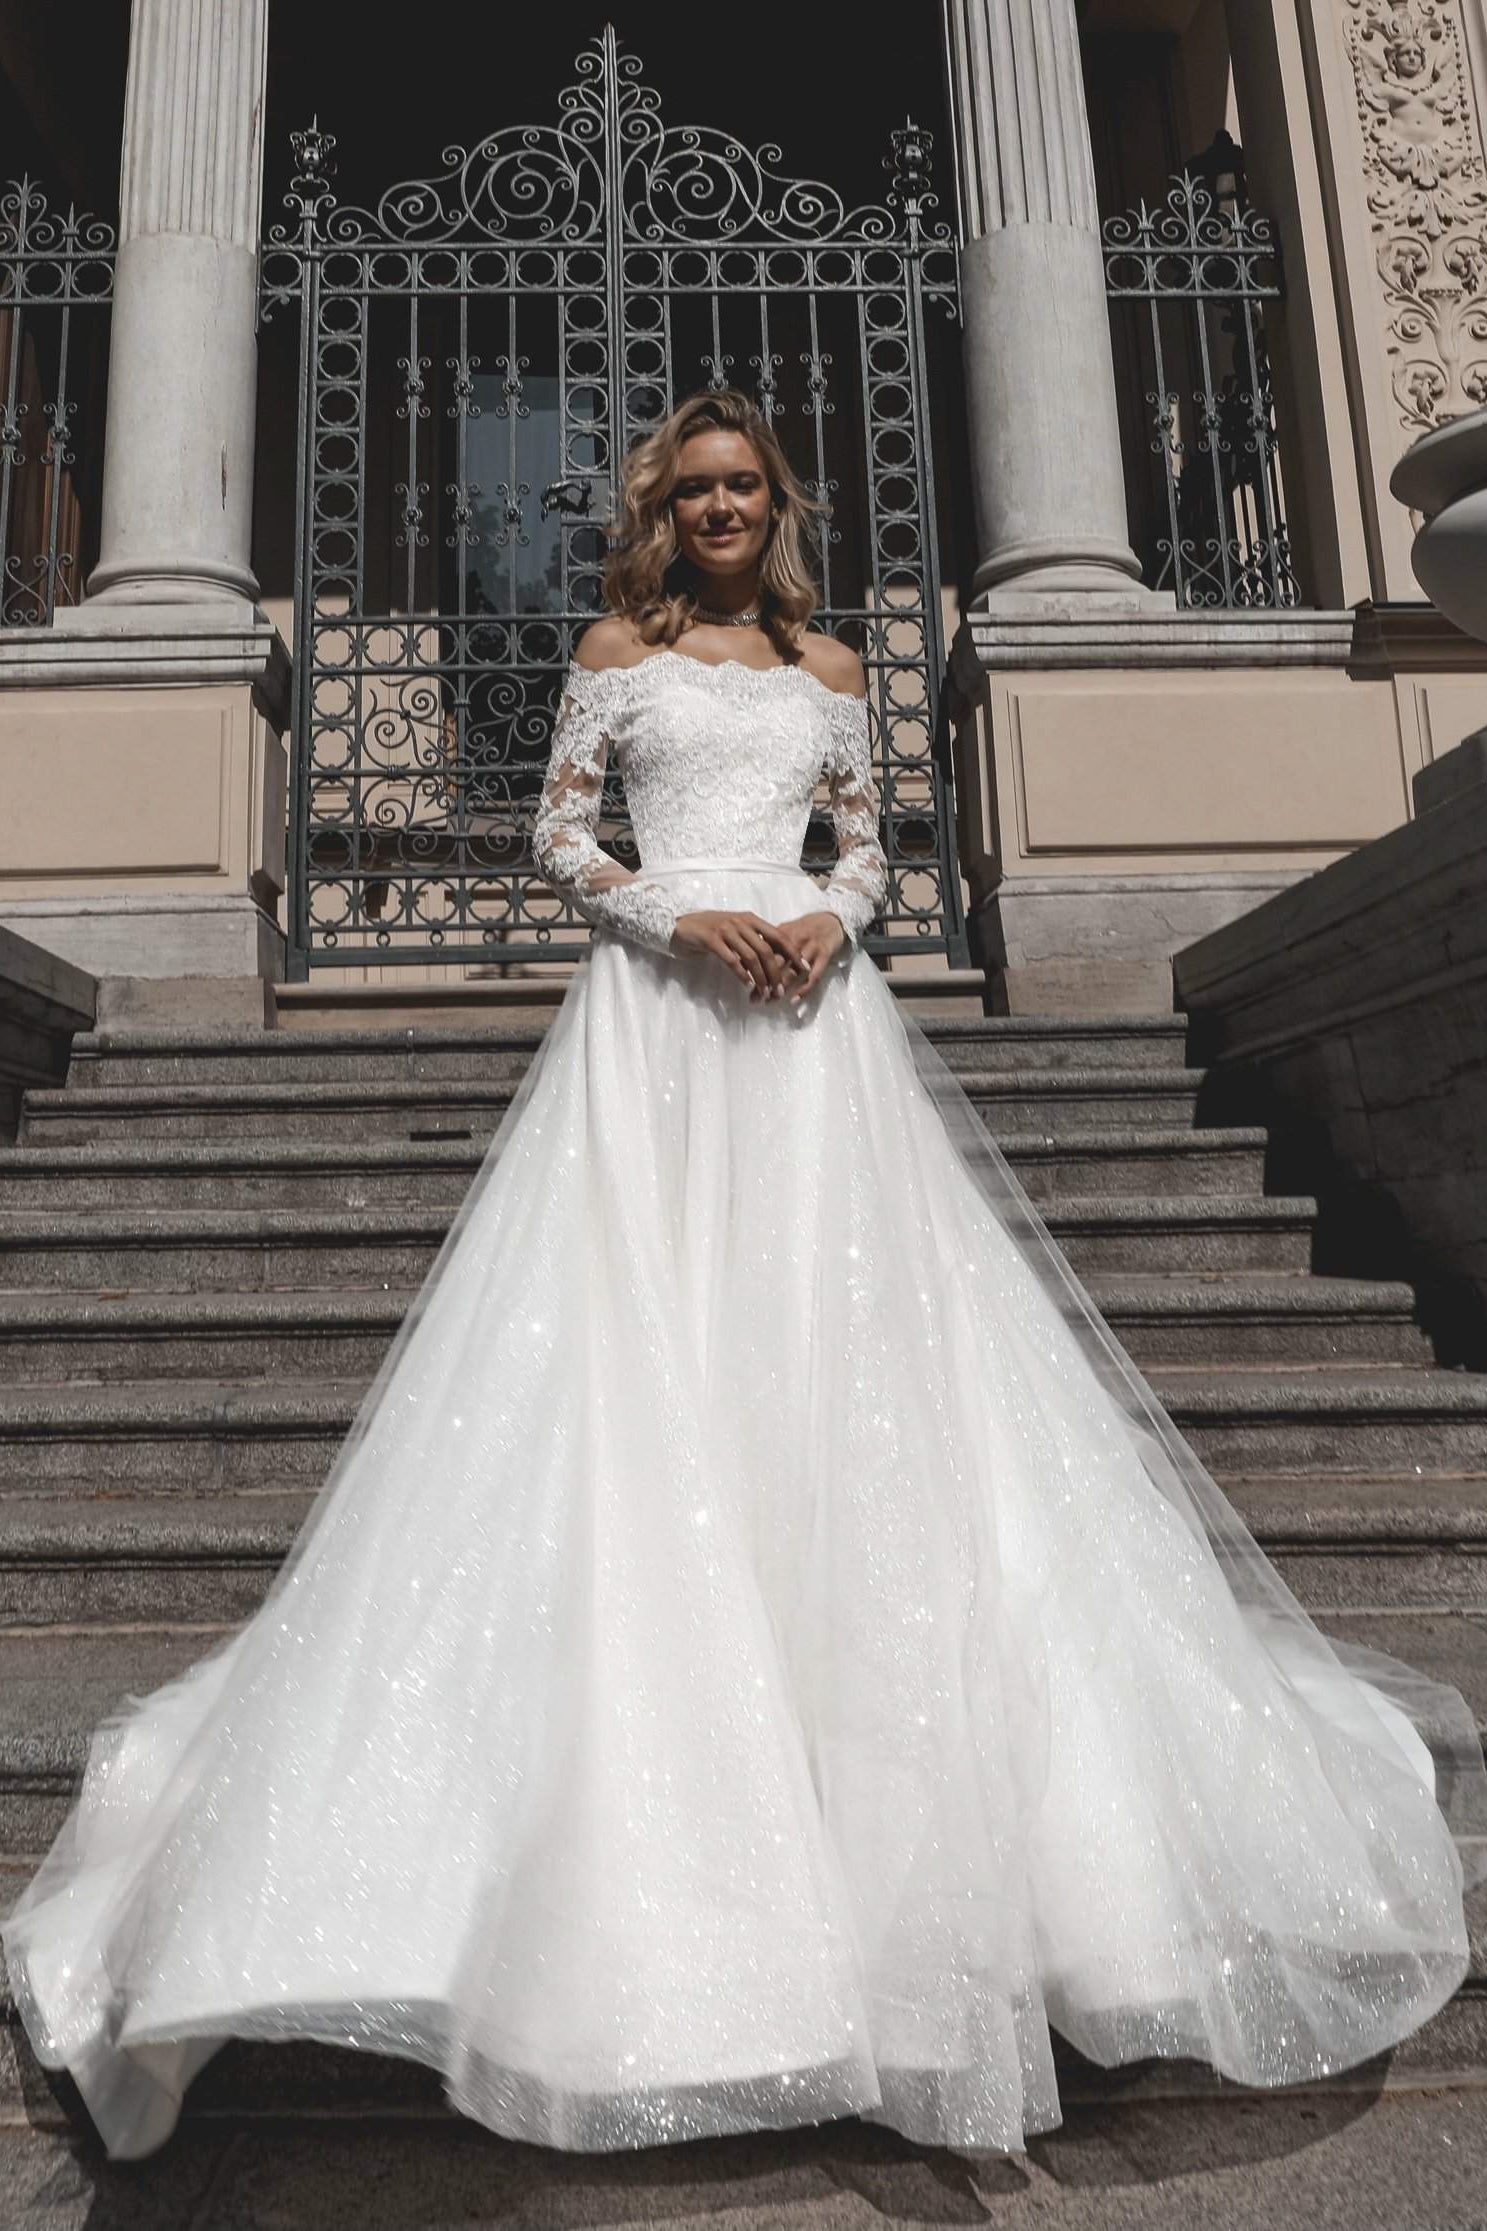 Lace off-the-shoulder Wedding Dress Olies with a Diamond Crust Skirt